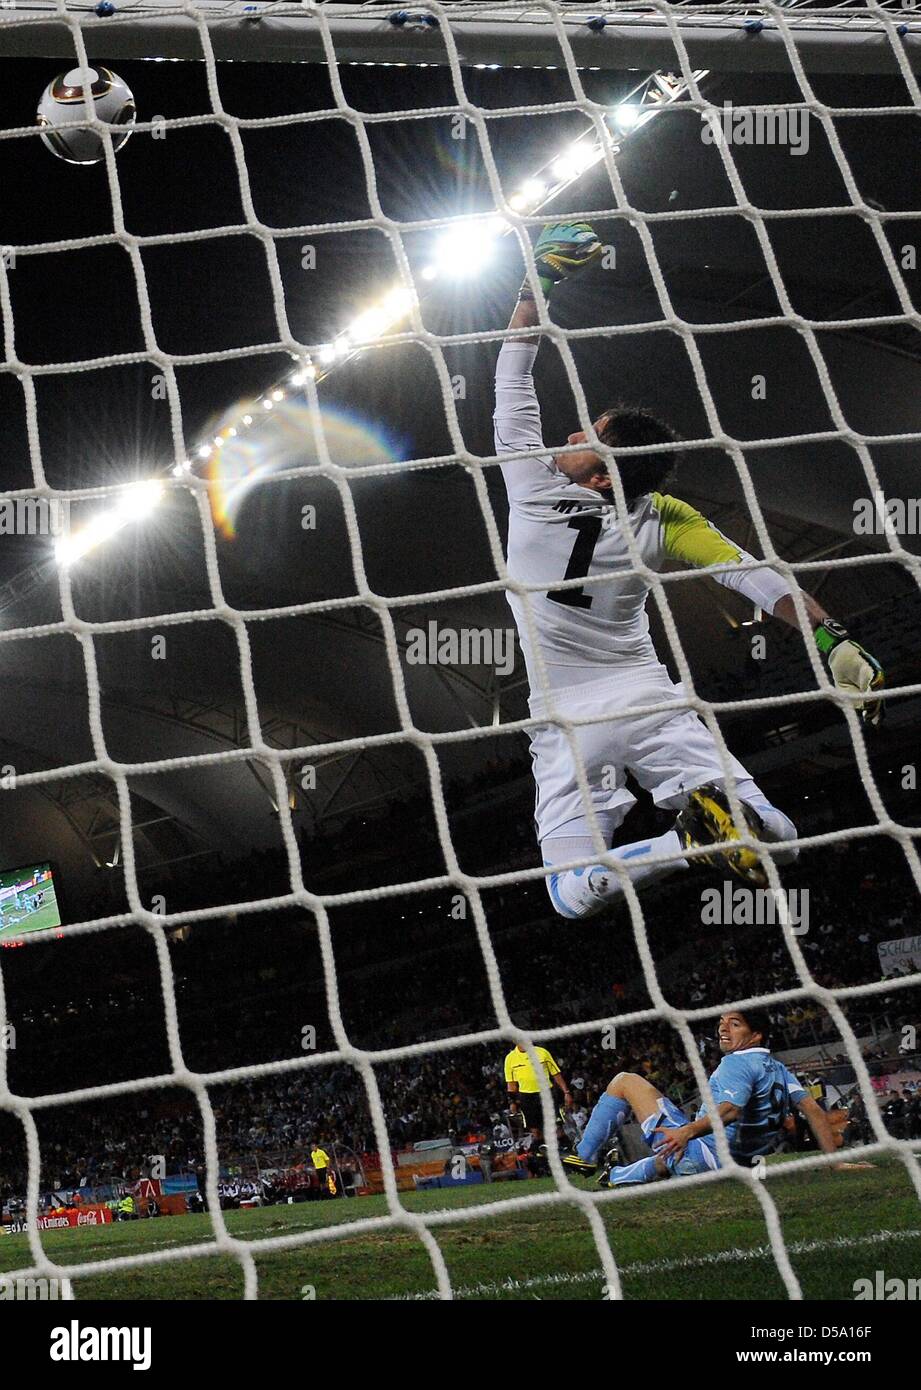 Uruguay's goalkeeper Fernando Muslera goes for the ball during the 2010 FIFA World Cup third place match between Uruguay and Germany at the Nelson Mandela Bay Stadium in Port Elizabeth, South Africa 10 July 2010. Photo: Marcus Brandt dpa - Please refer to http://dpaq.de/FIFA-WM2010-TC  +++(c) dpa - Bildfunk+++ Stock Photo